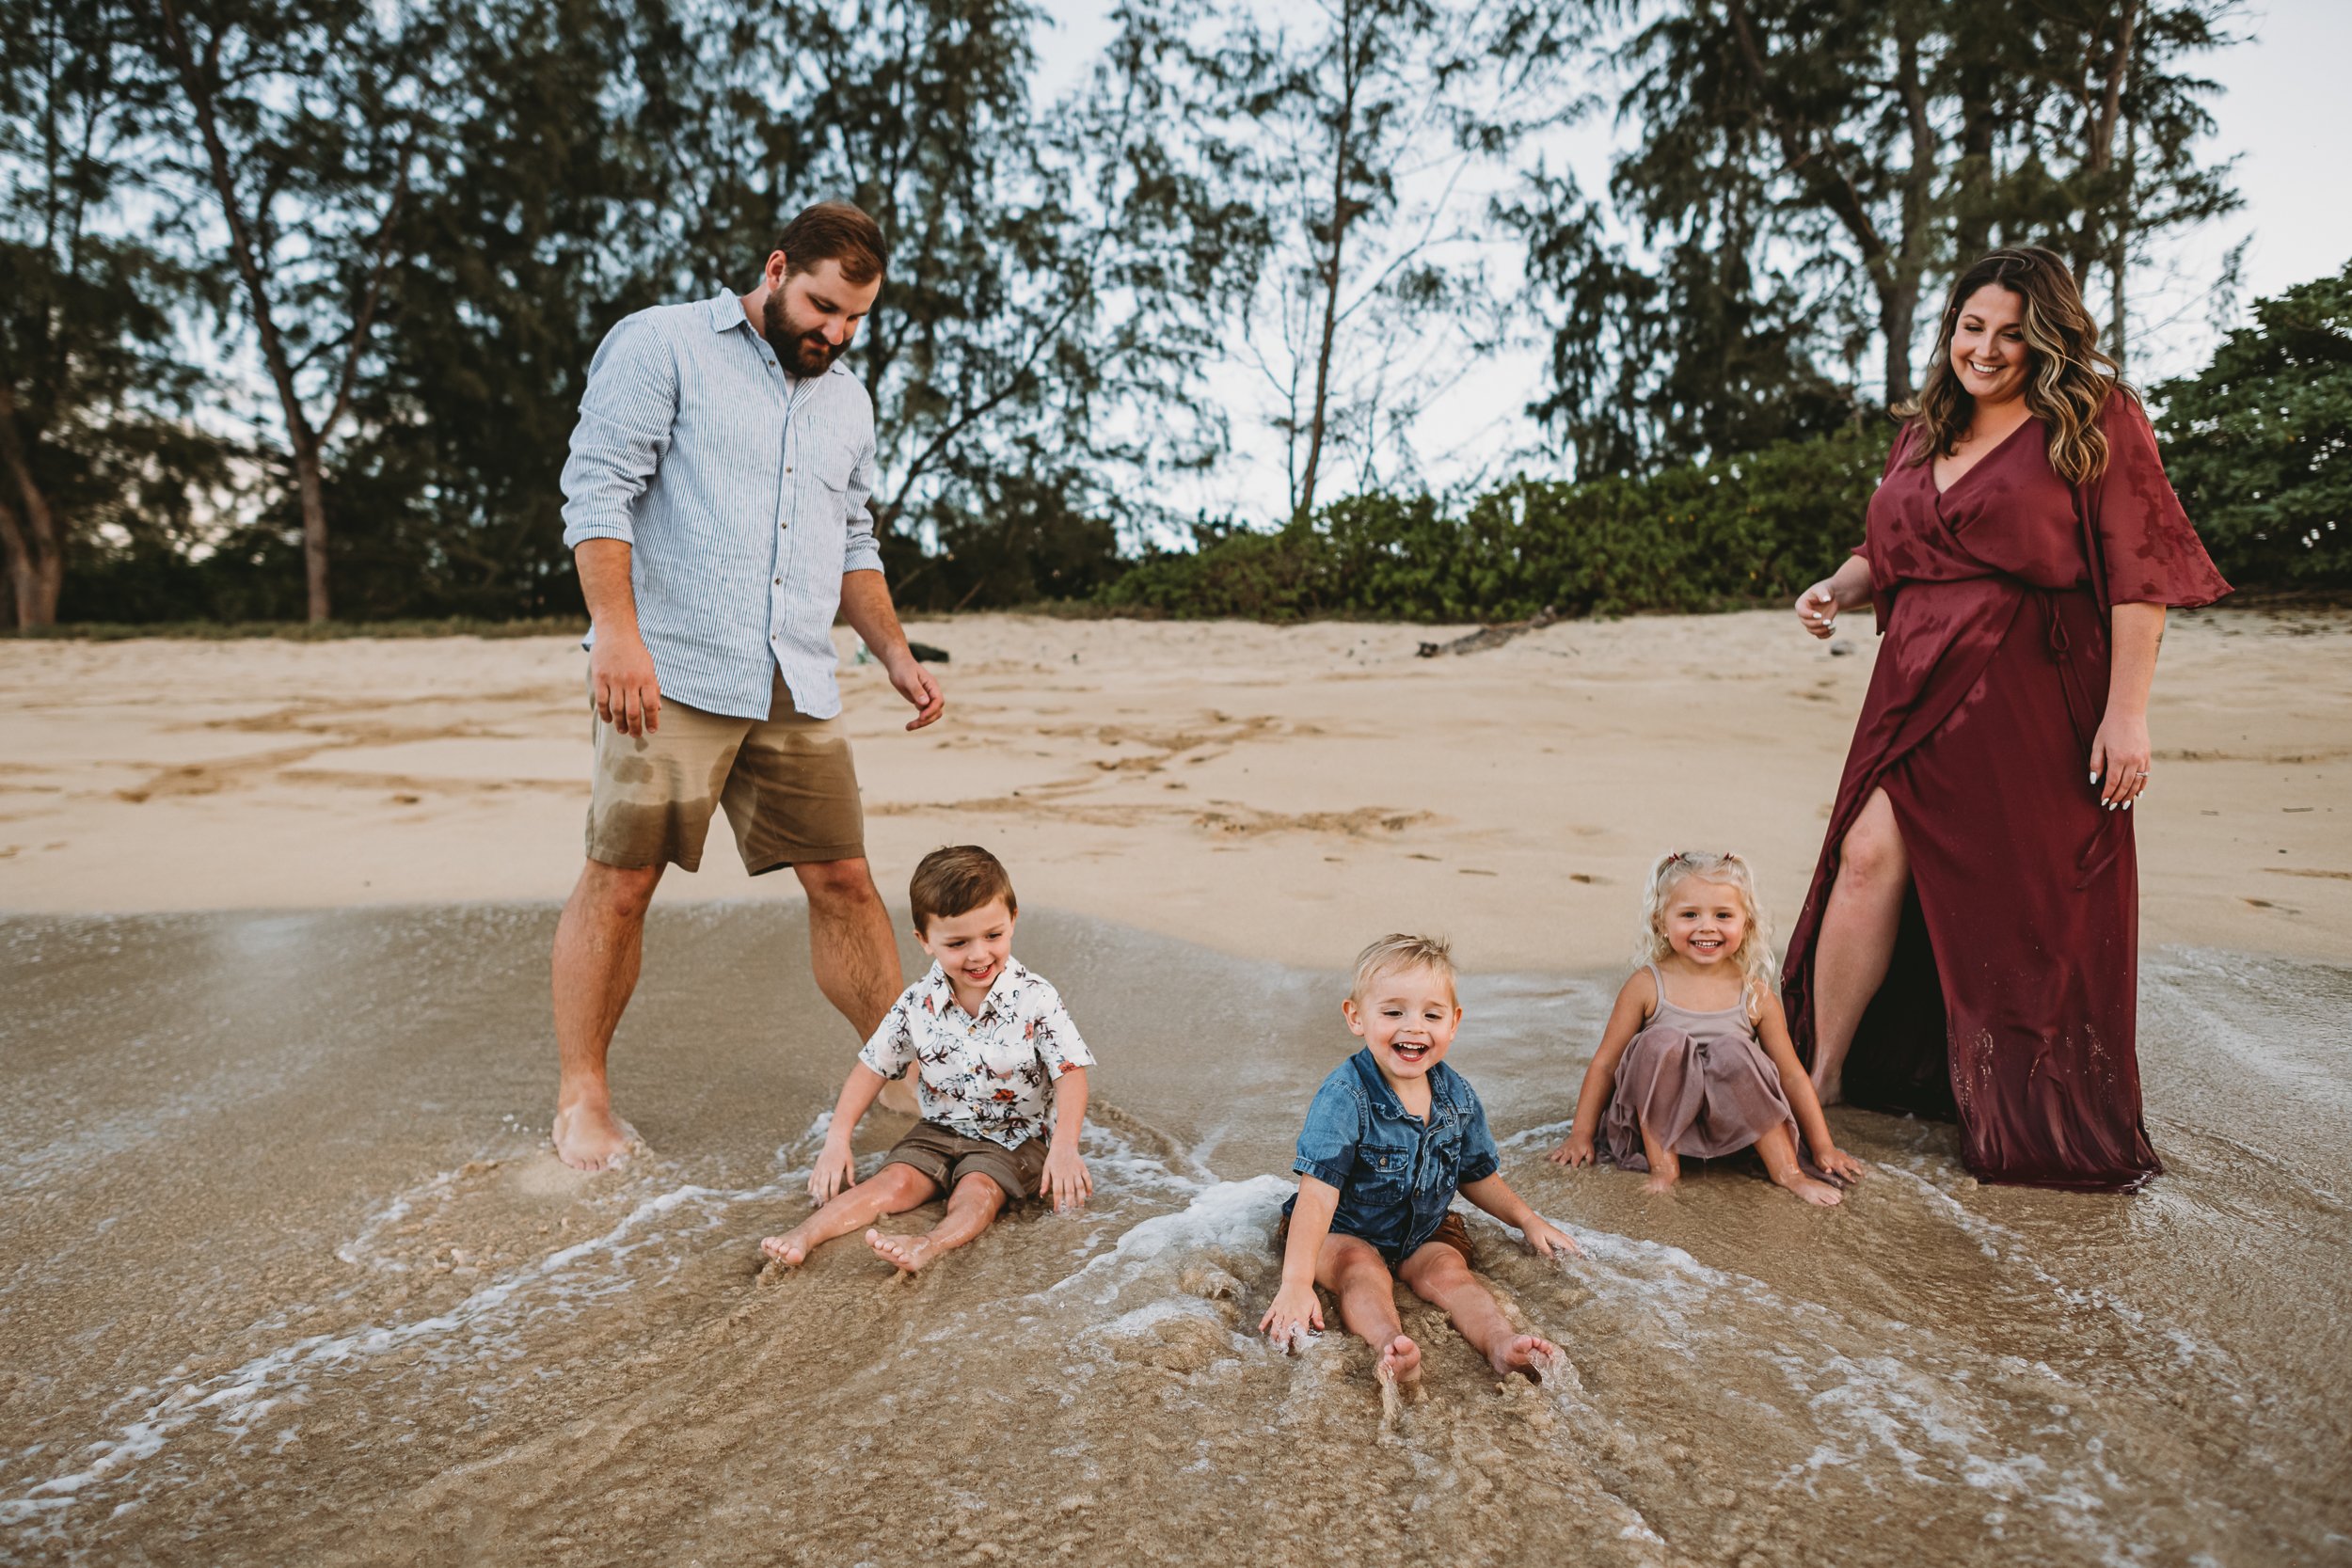 North-shore-family-photos-family-of-five-small-children-playful-organic-lifestyle-beach-photos-0113.jpg